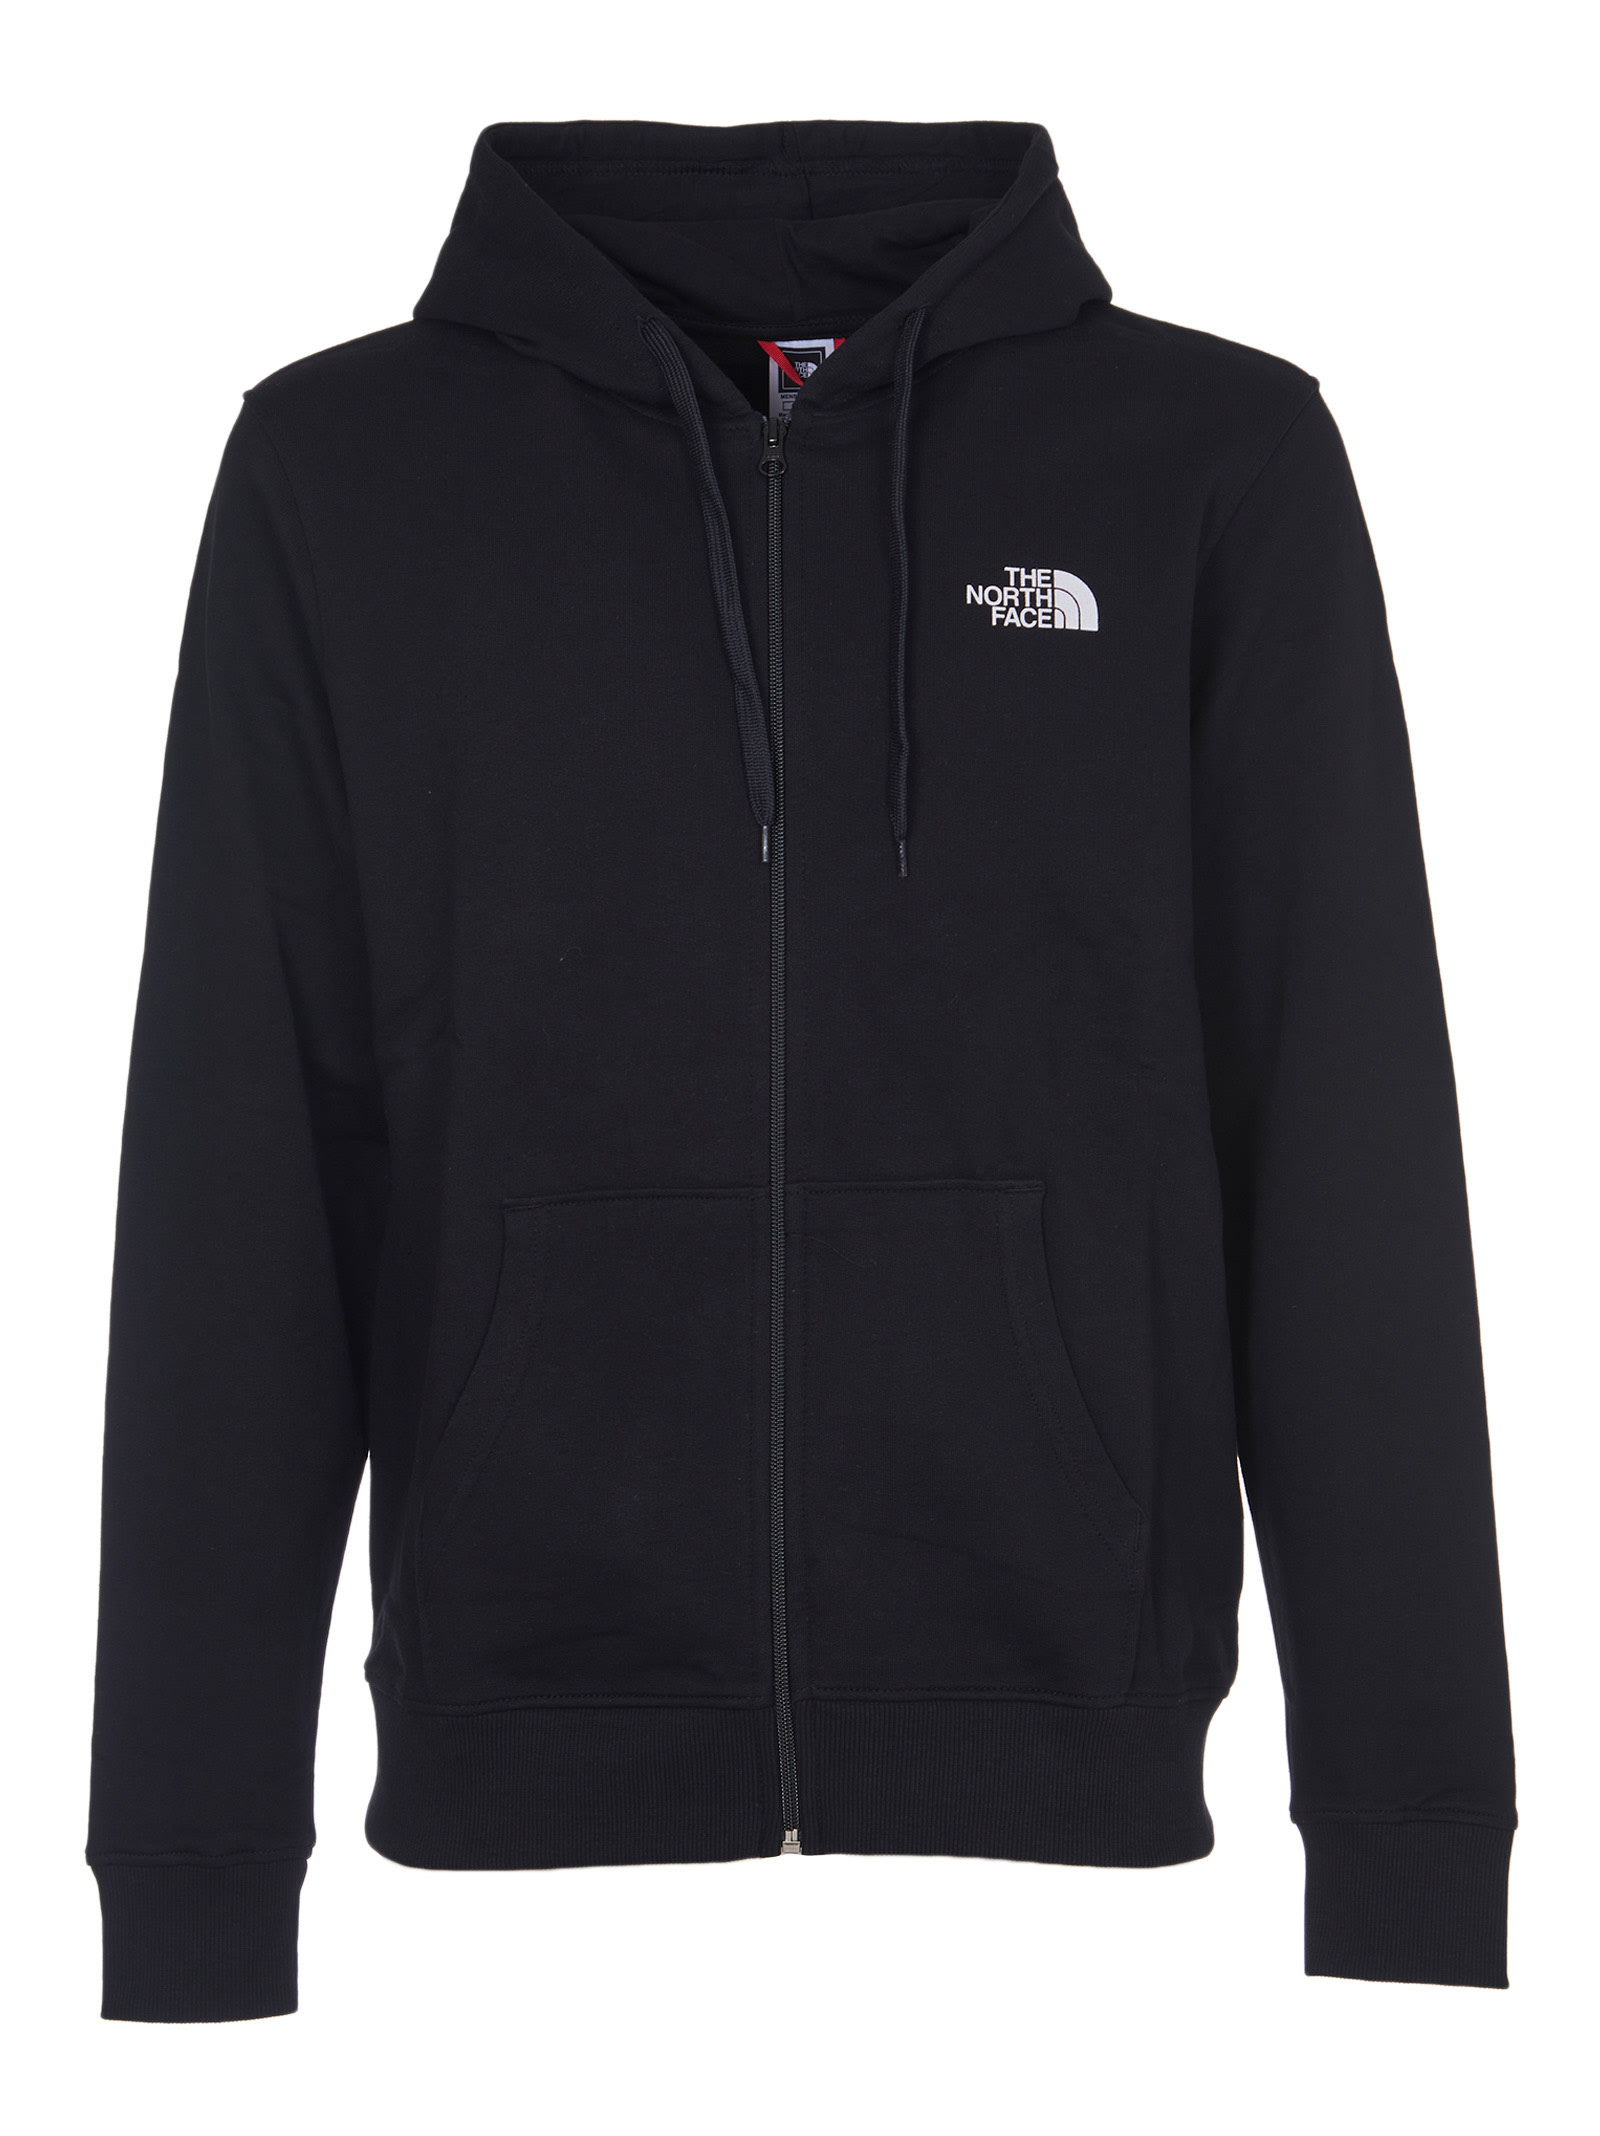 The North Face Black Hoodie With Zip